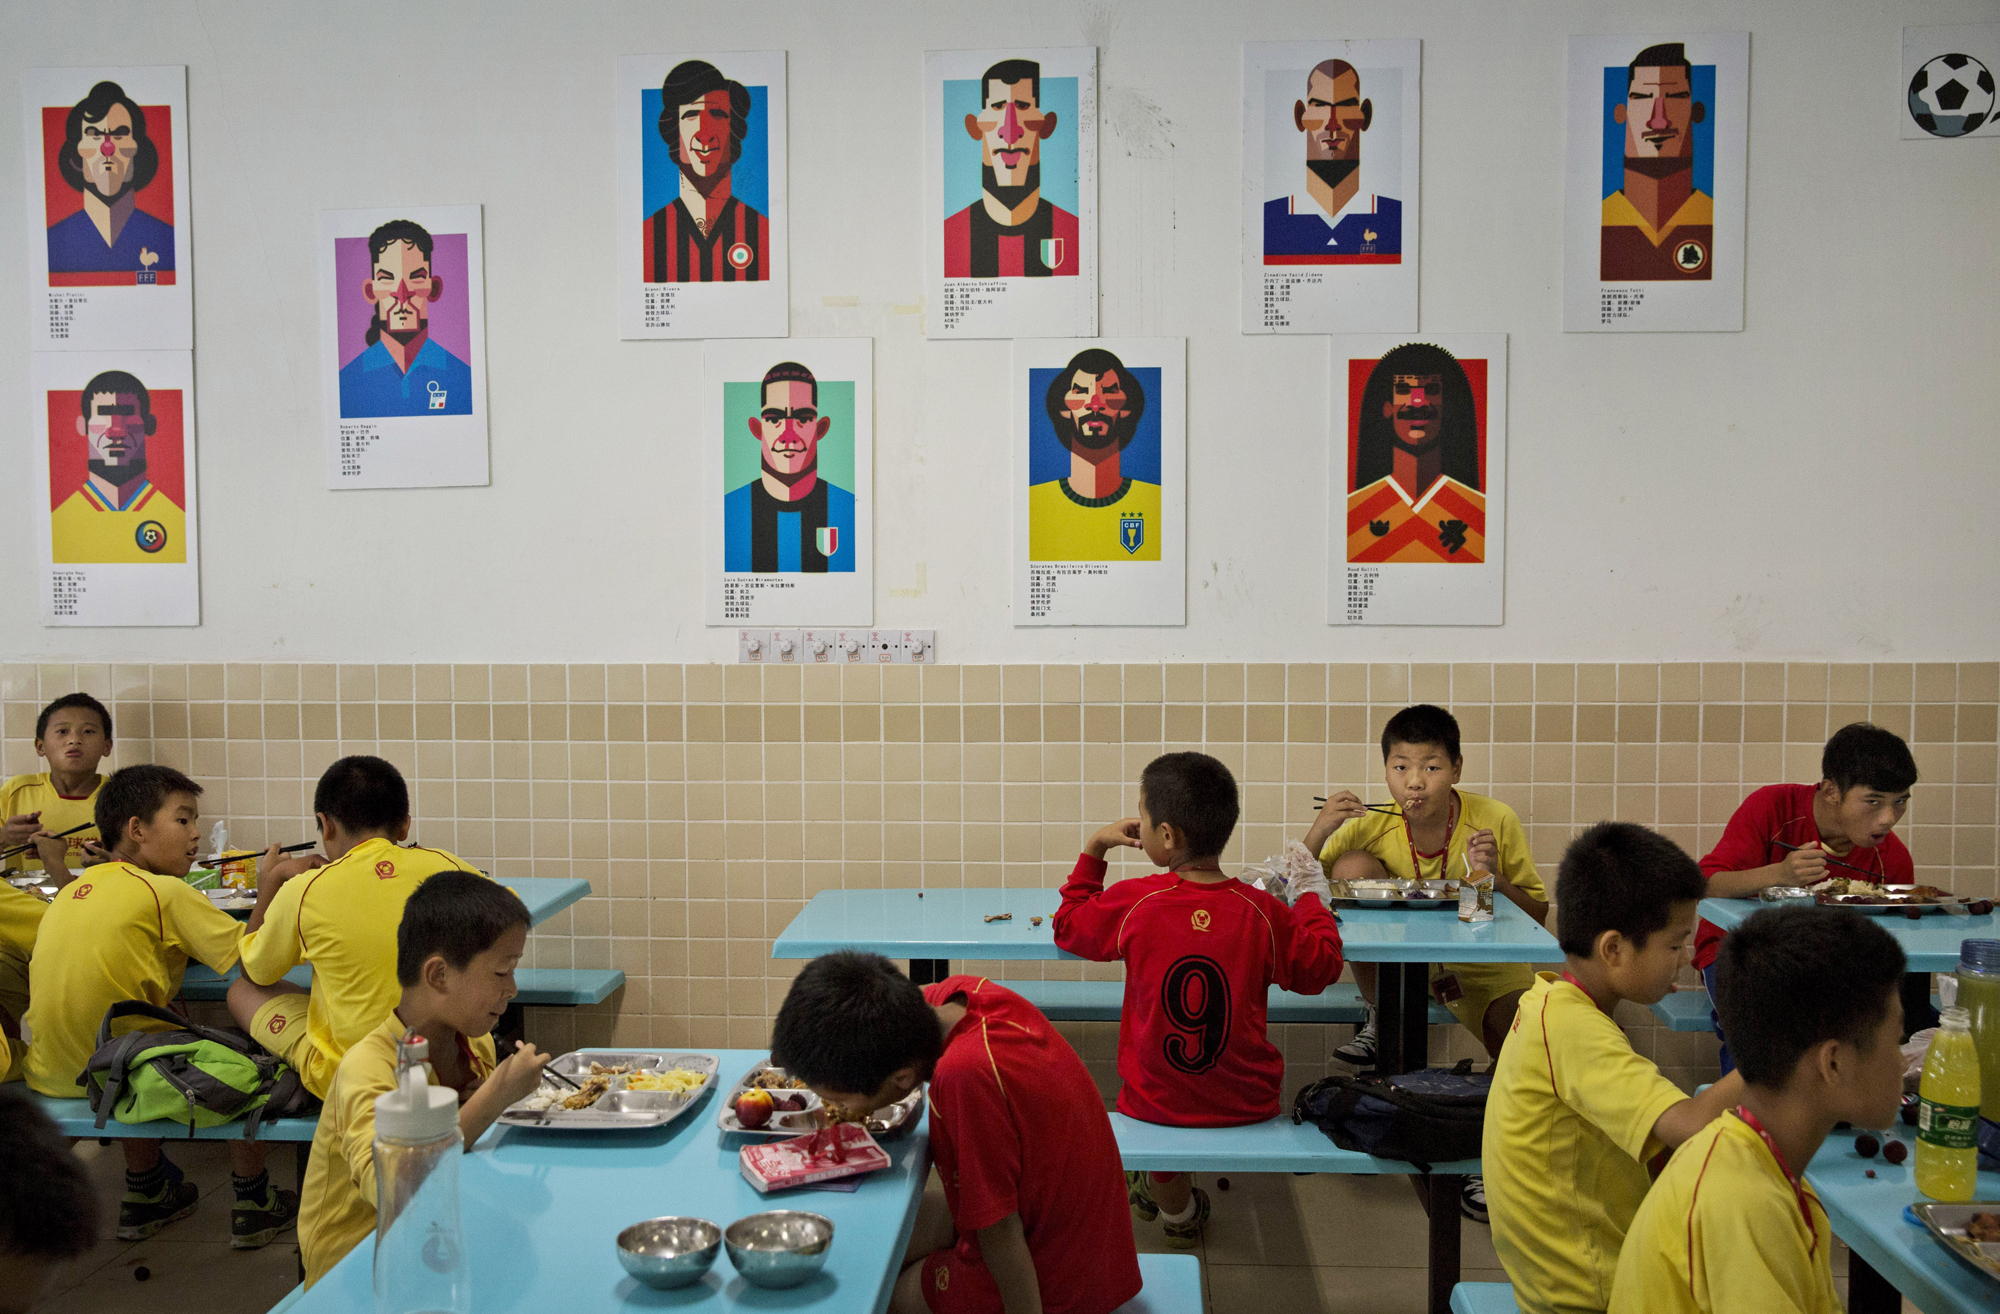 Players eat lunch under caricatures of famous soccer players in the canteen at the Evergrande International Football School on June 12.